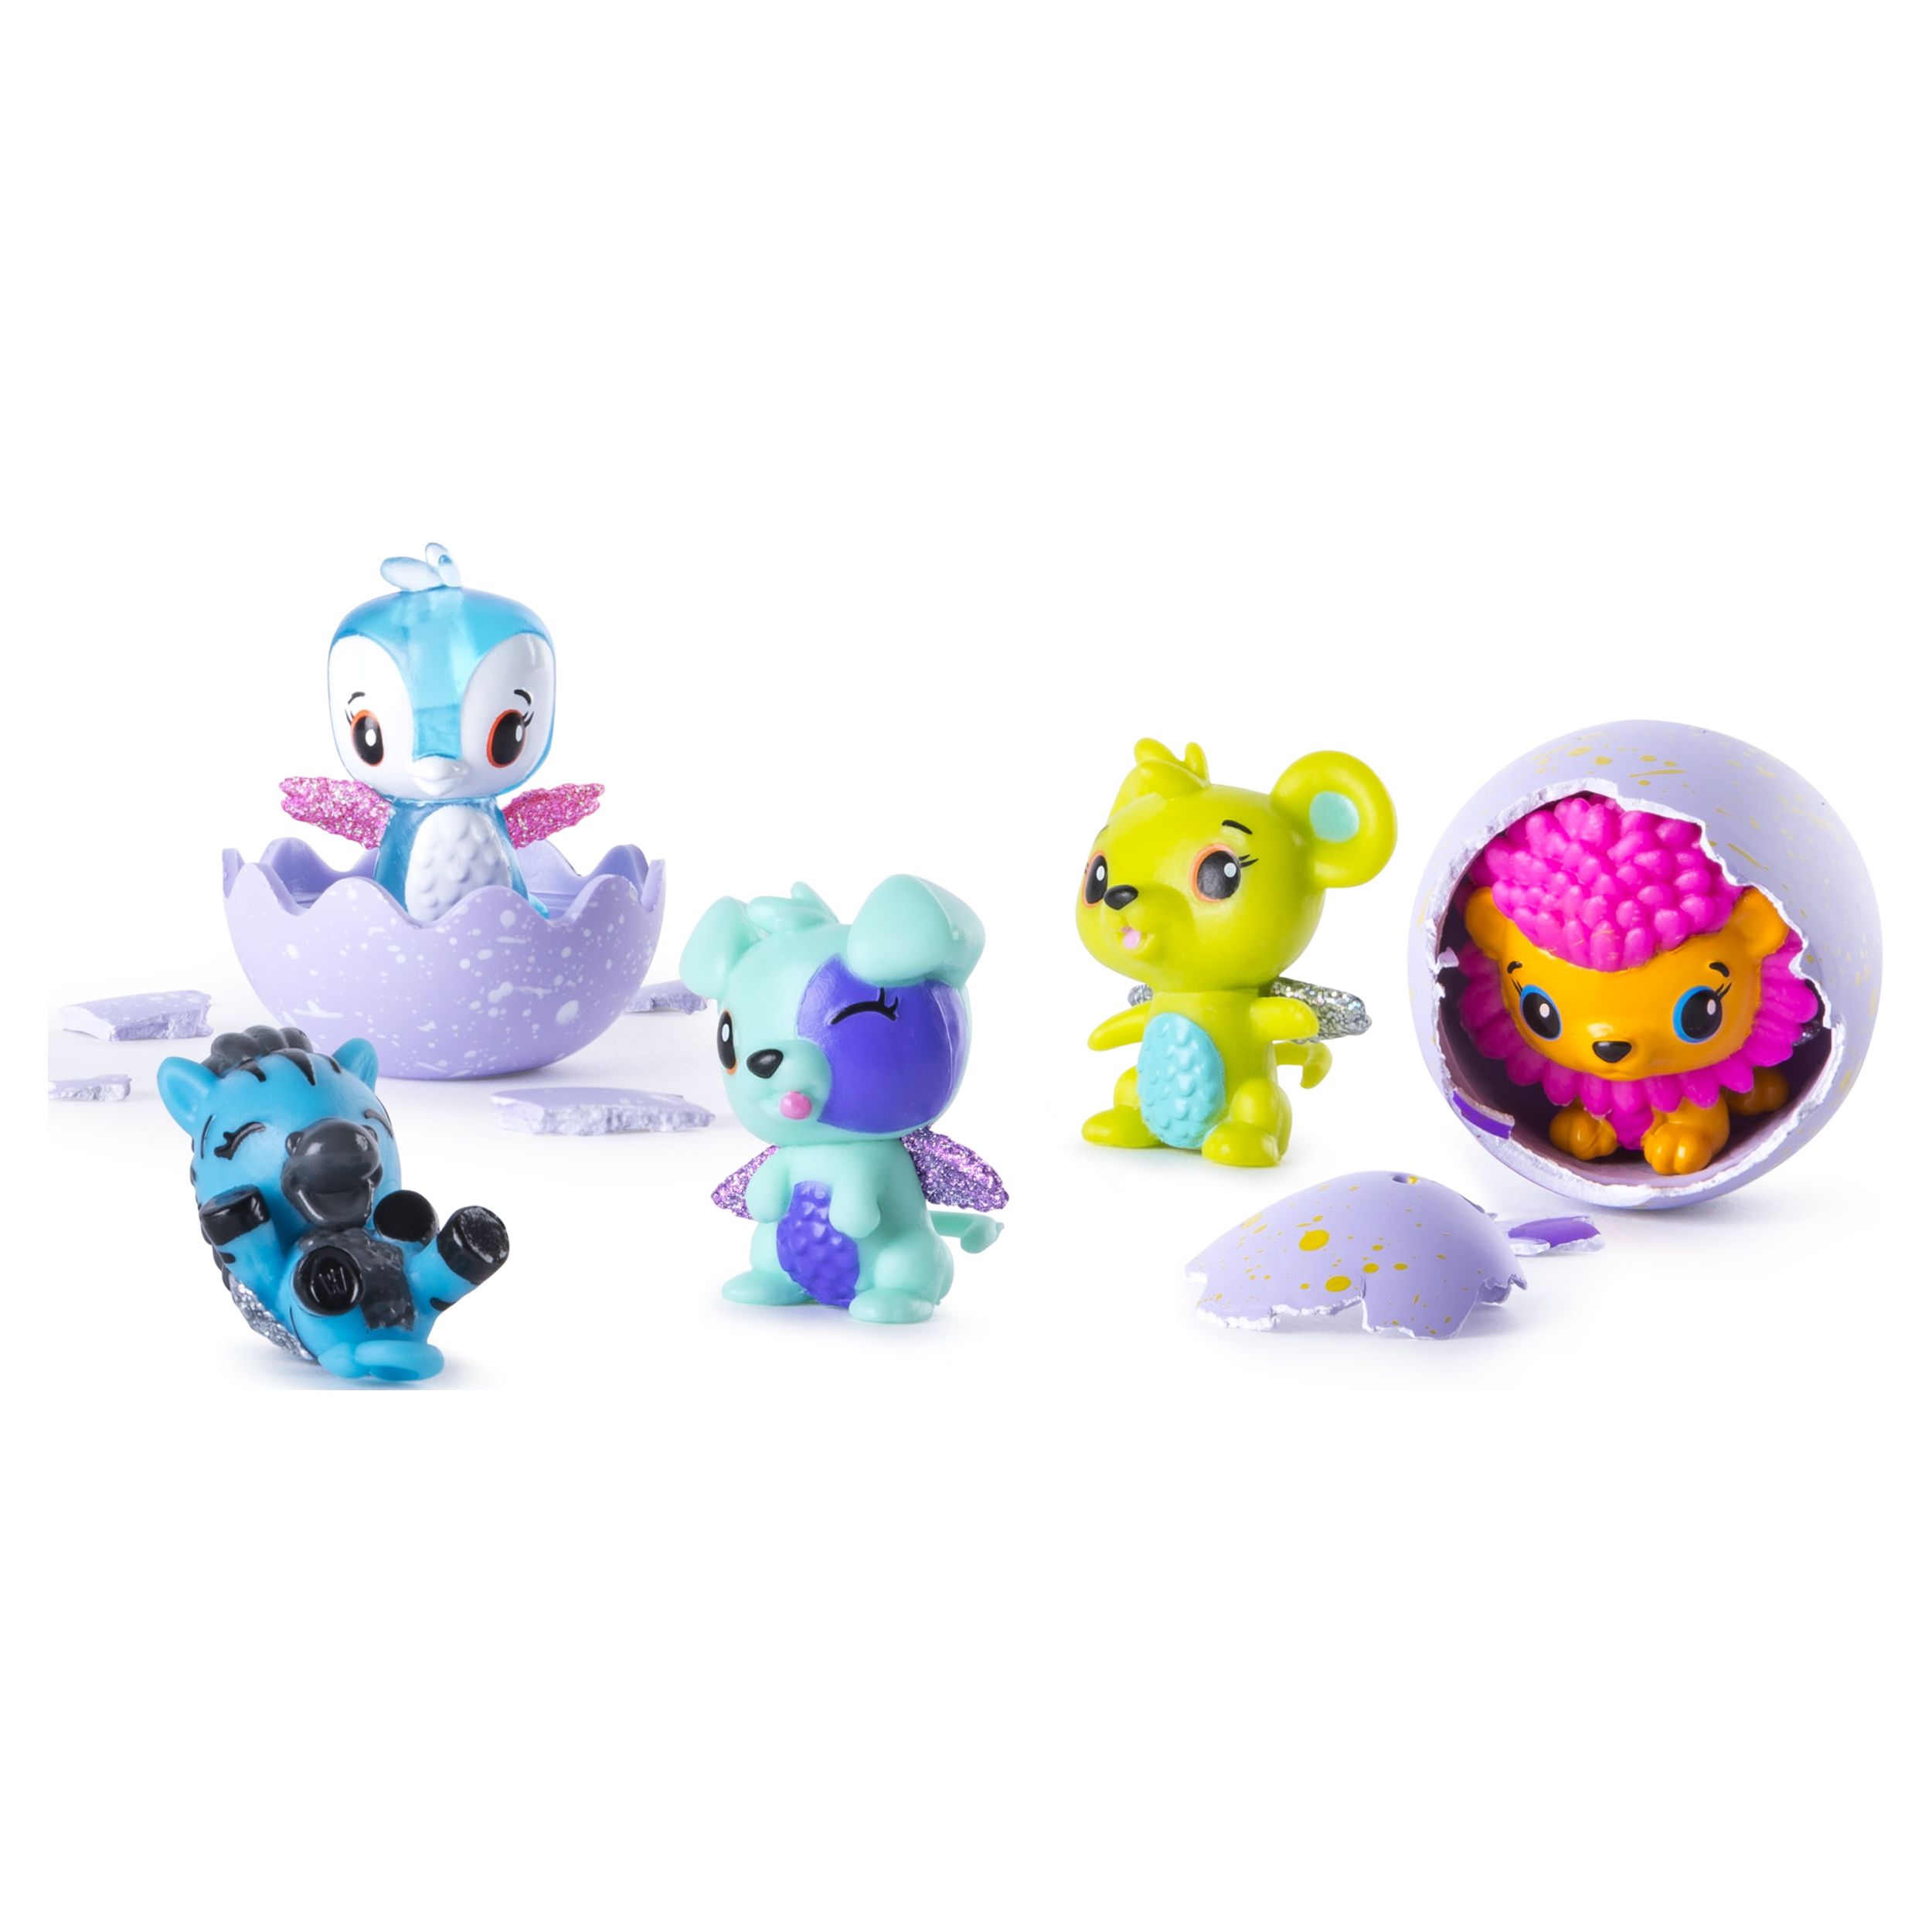 Hatchimals, CollEGGtibles, 4 Pack + Bonus (Styles & Colors May Vary) by Spin Master - Electronic Pets - image 4 of 14